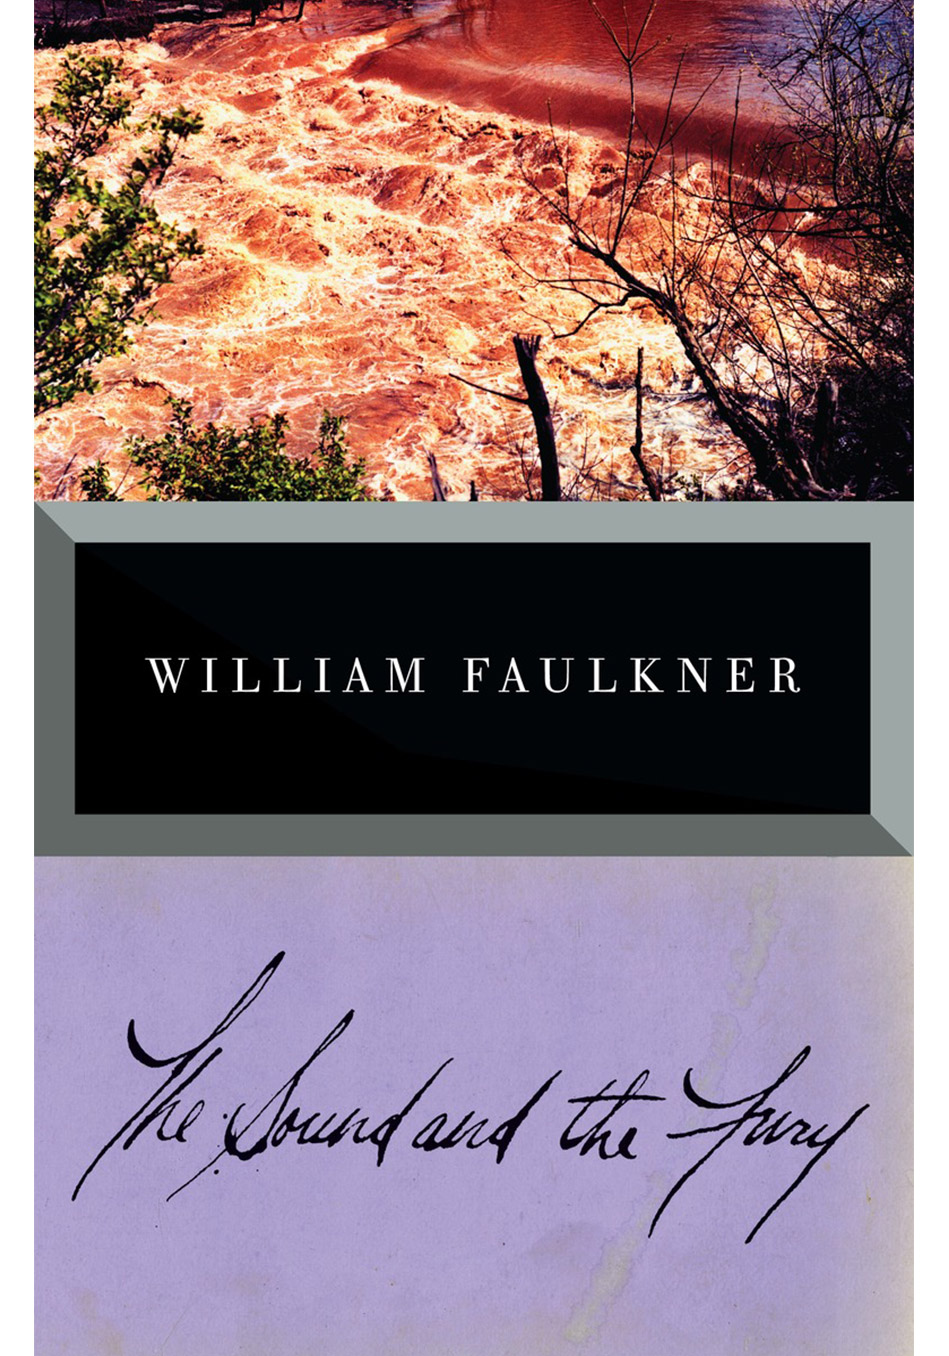 the-sound-and-the-fury-by-william-faulkner